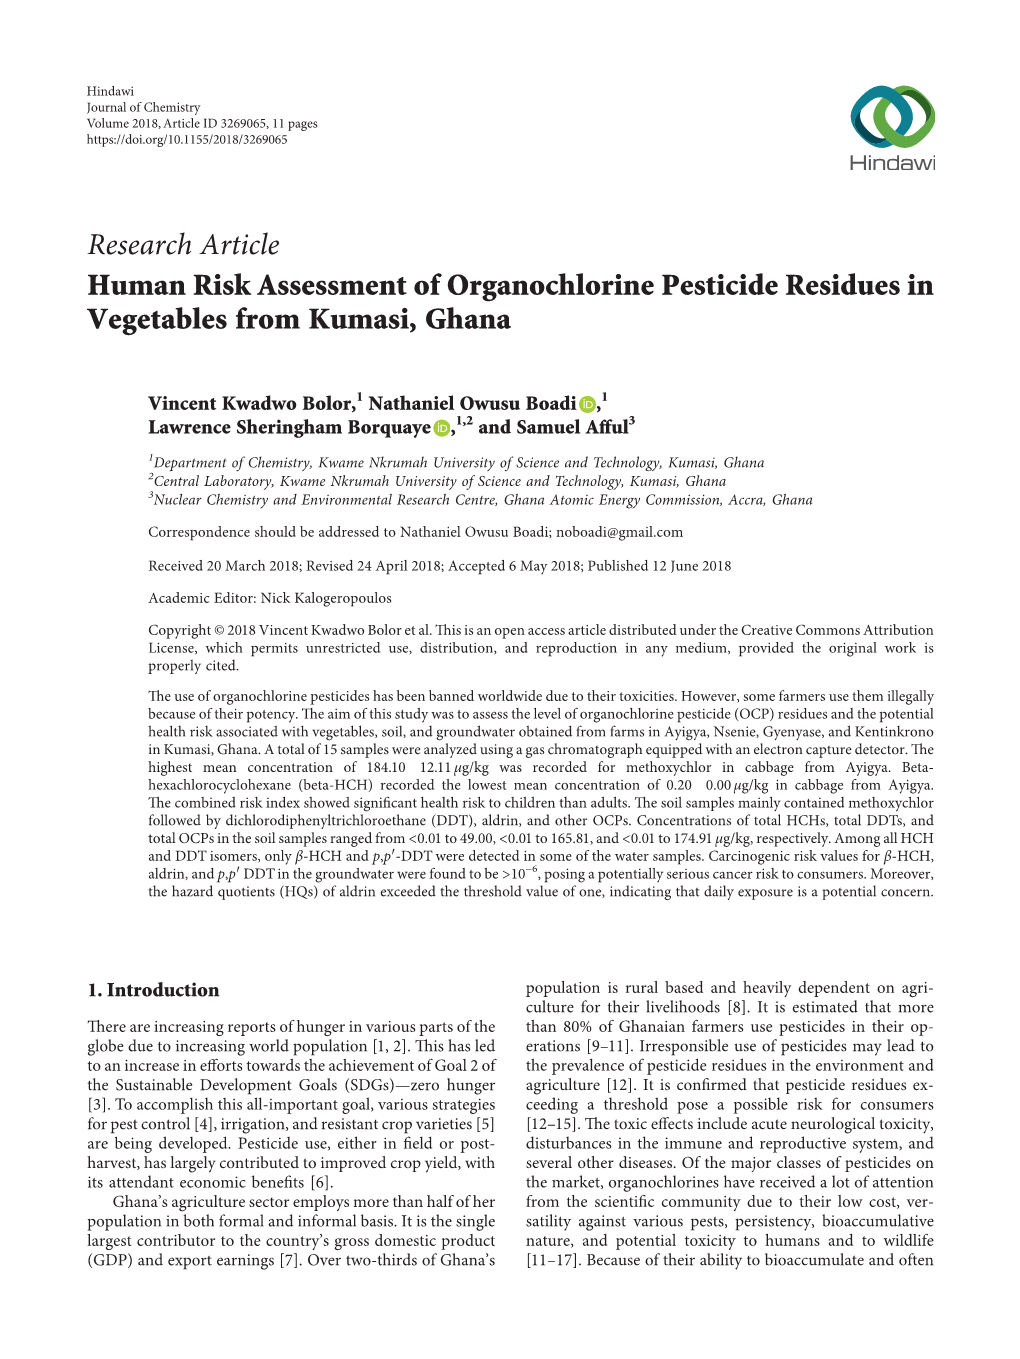 Research Article Human Risk Assessment of Organochlorine Pesticide Residues in Vegetables from Kumasi, Ghana